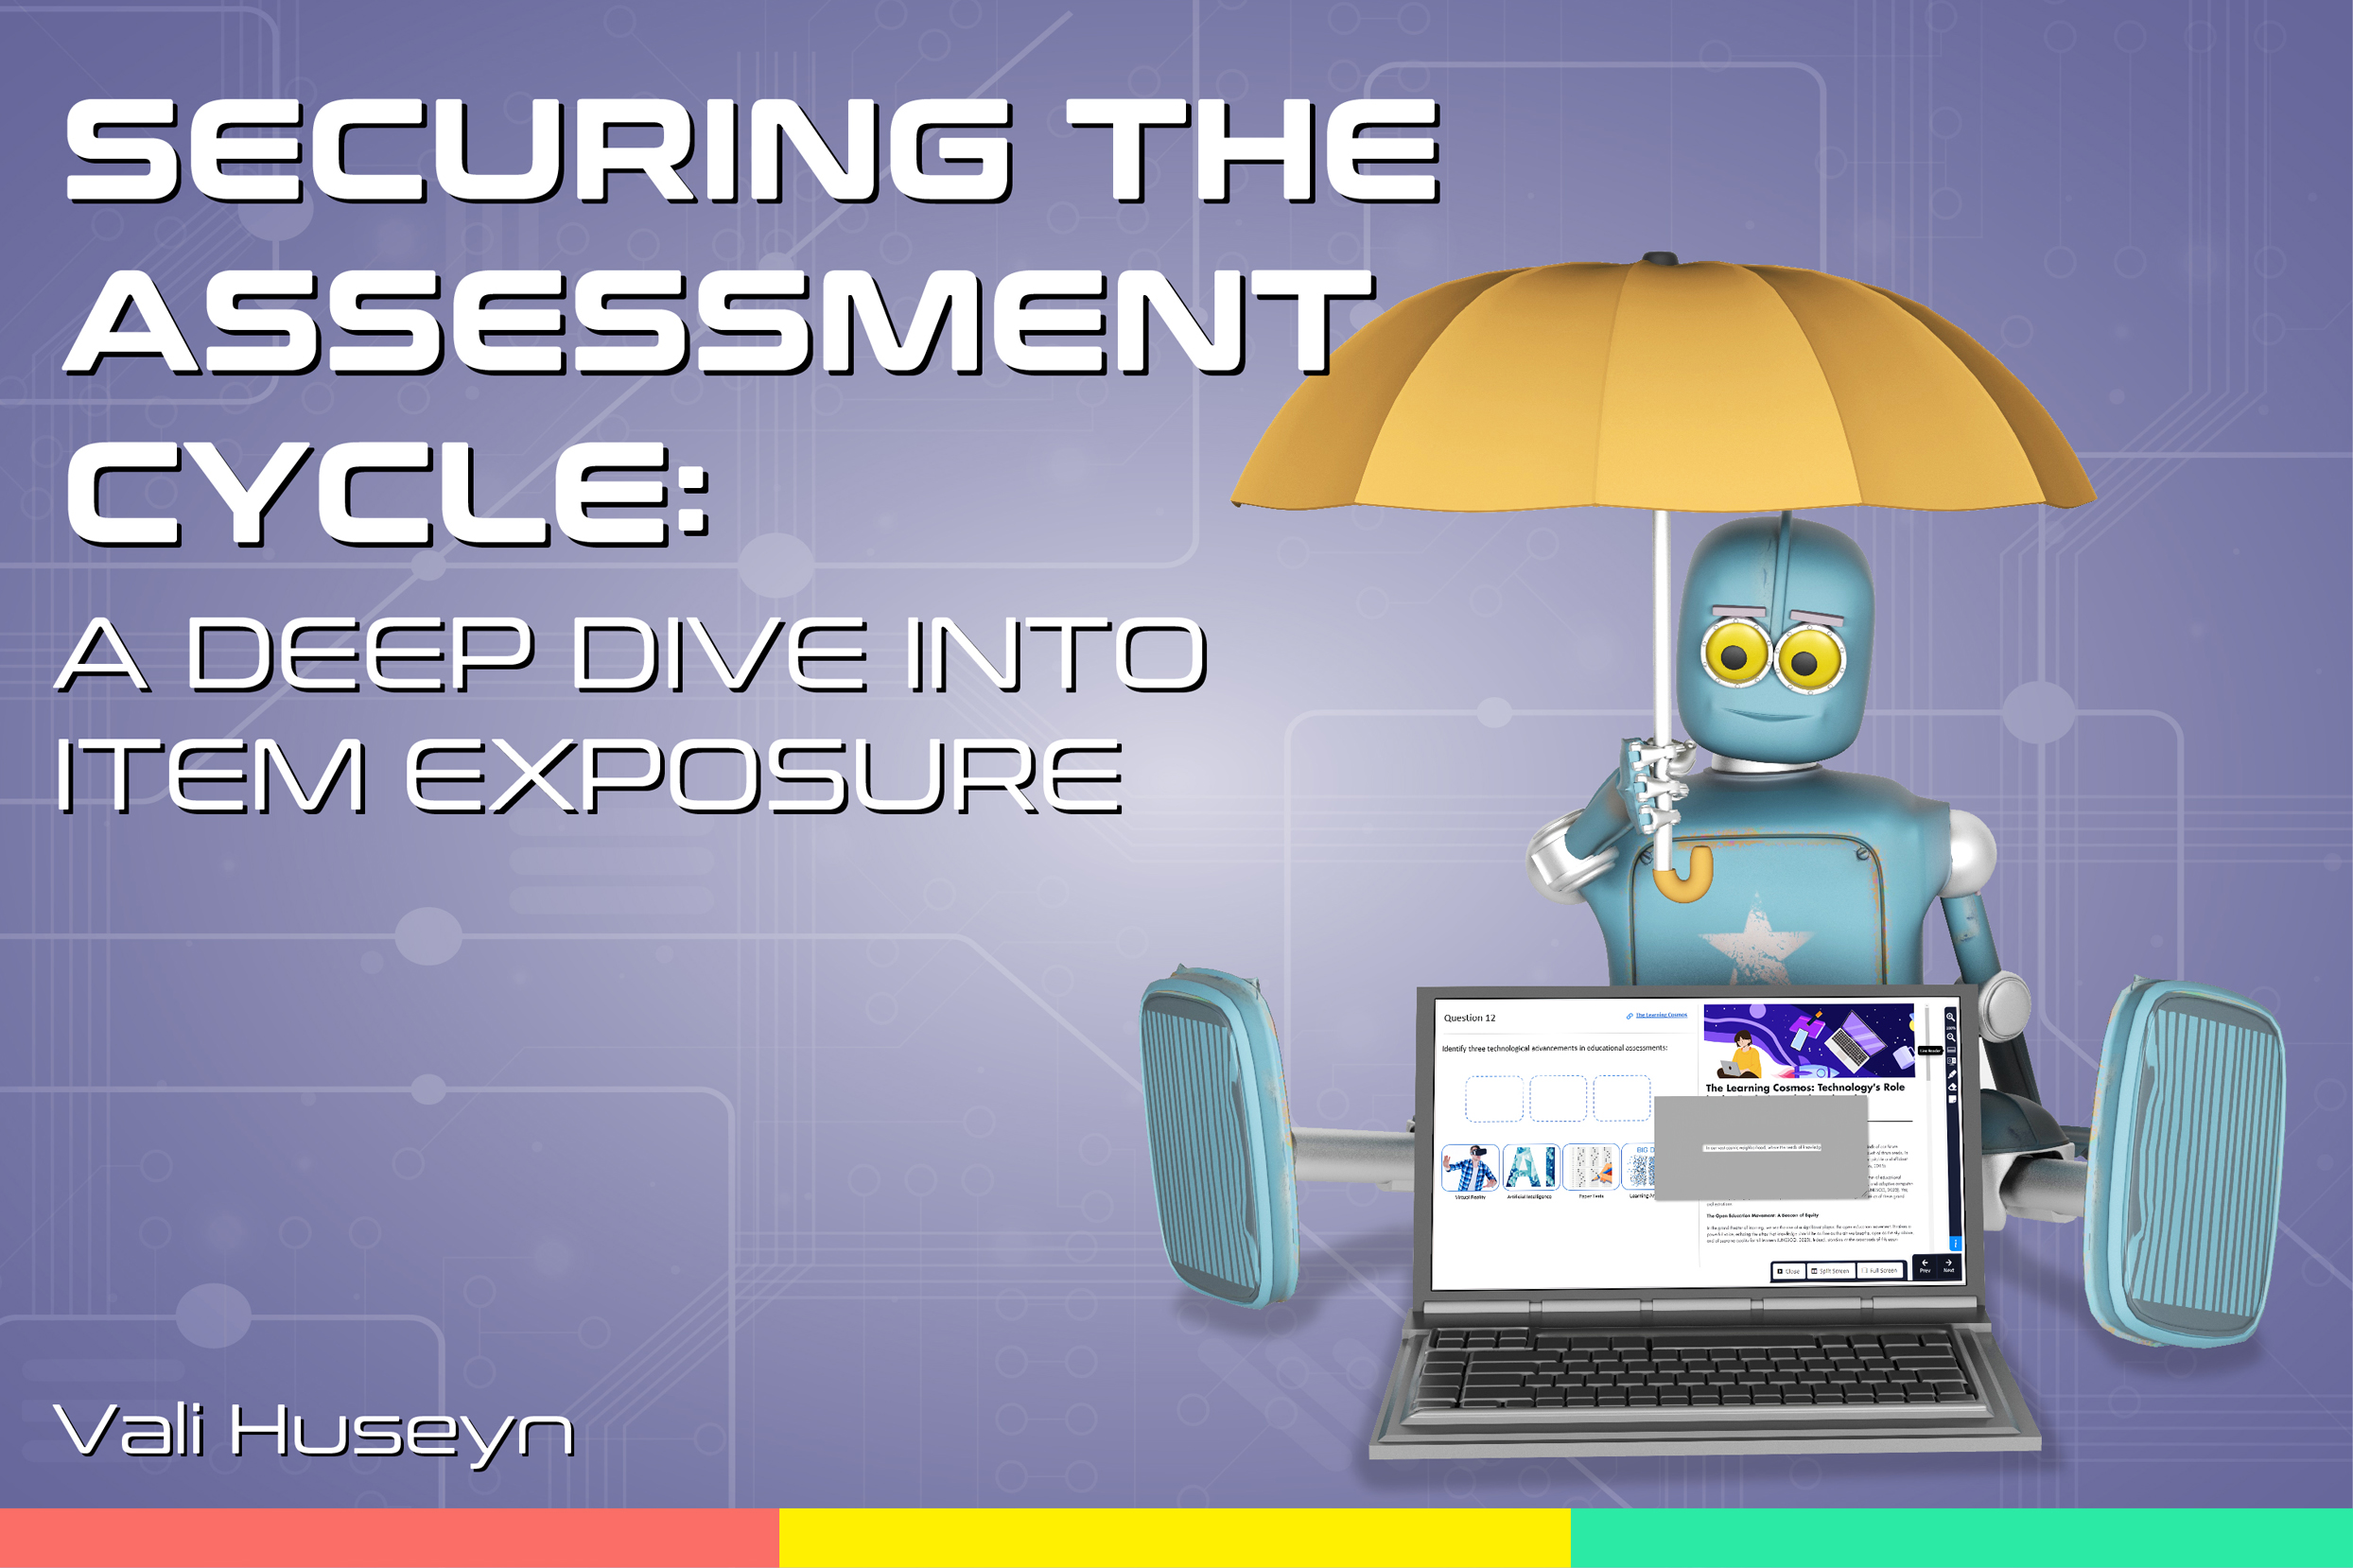 Securing the Assessment Cycle: A Deep Dive into Item Exposure